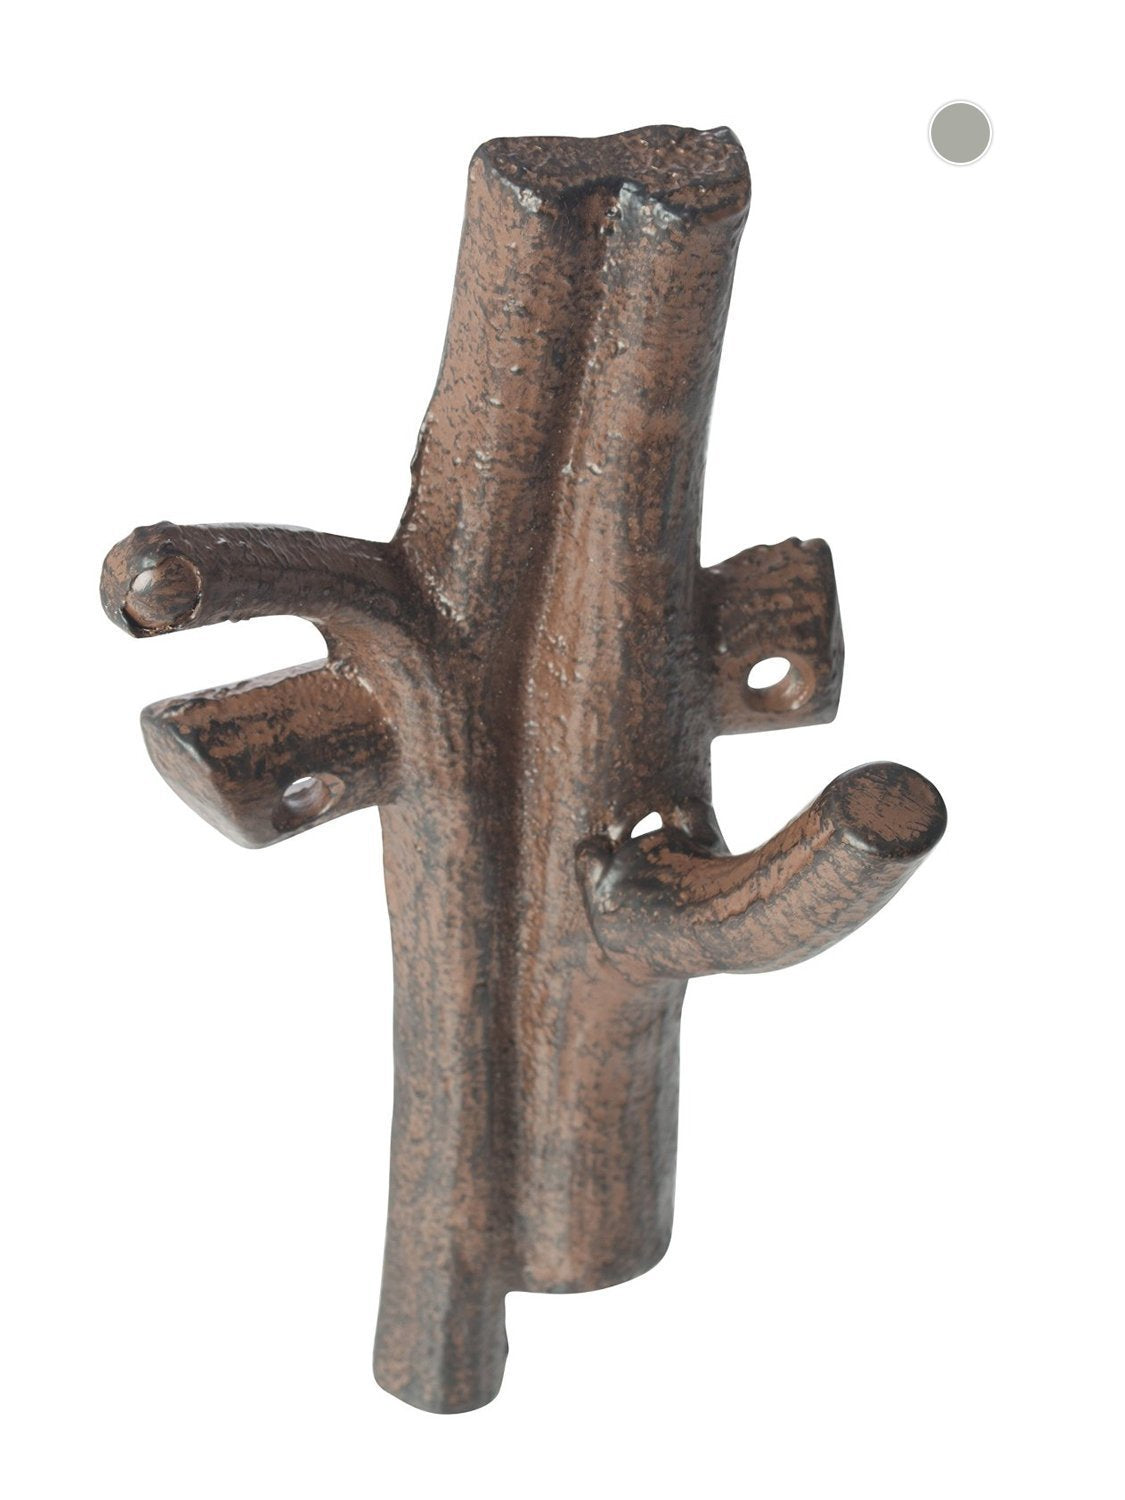 Cast Iron Branch Wall Hook | Wall Mounted Decorative Hanger with 2 Coat Hooks | For Coats, Purses, Hats, Clothes, Towels and More | 4x2.5x7.3" | With Screws And Anchors By Comfify (Rust Brown)